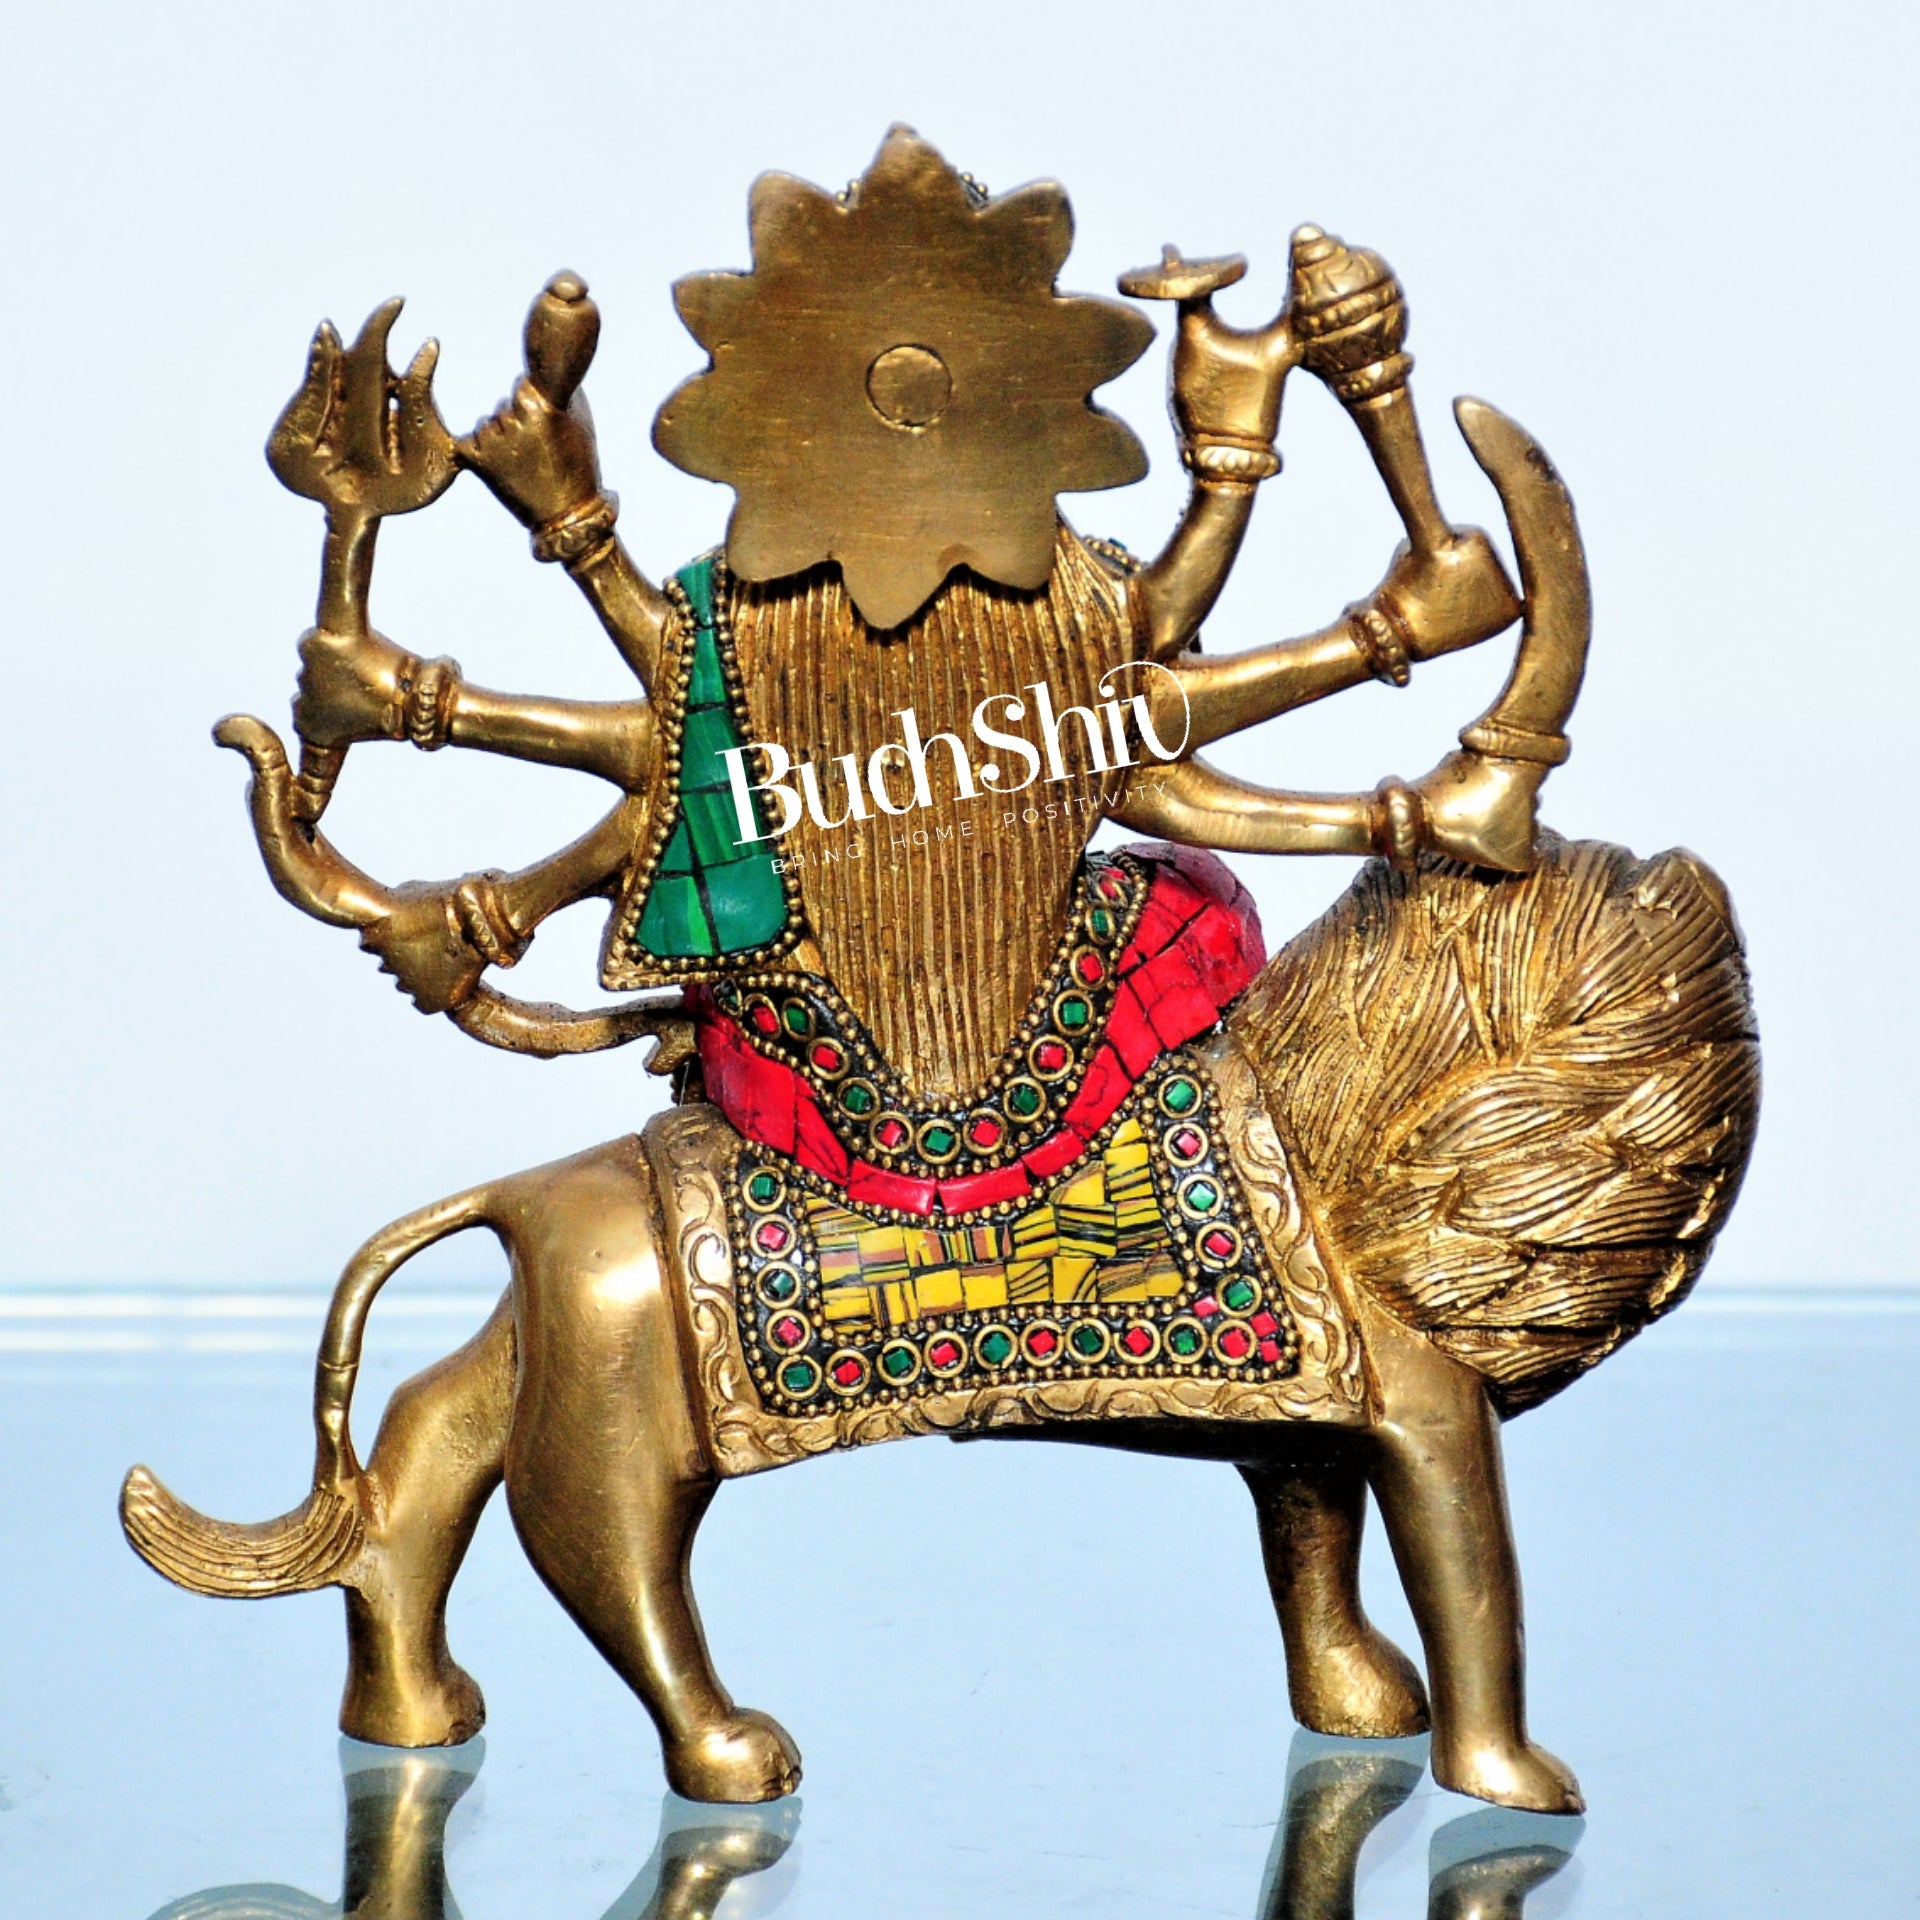 Goddess Durga brass idol with 8 arms sitting on lion with stonework 7.5 inches - Budhshiv.com